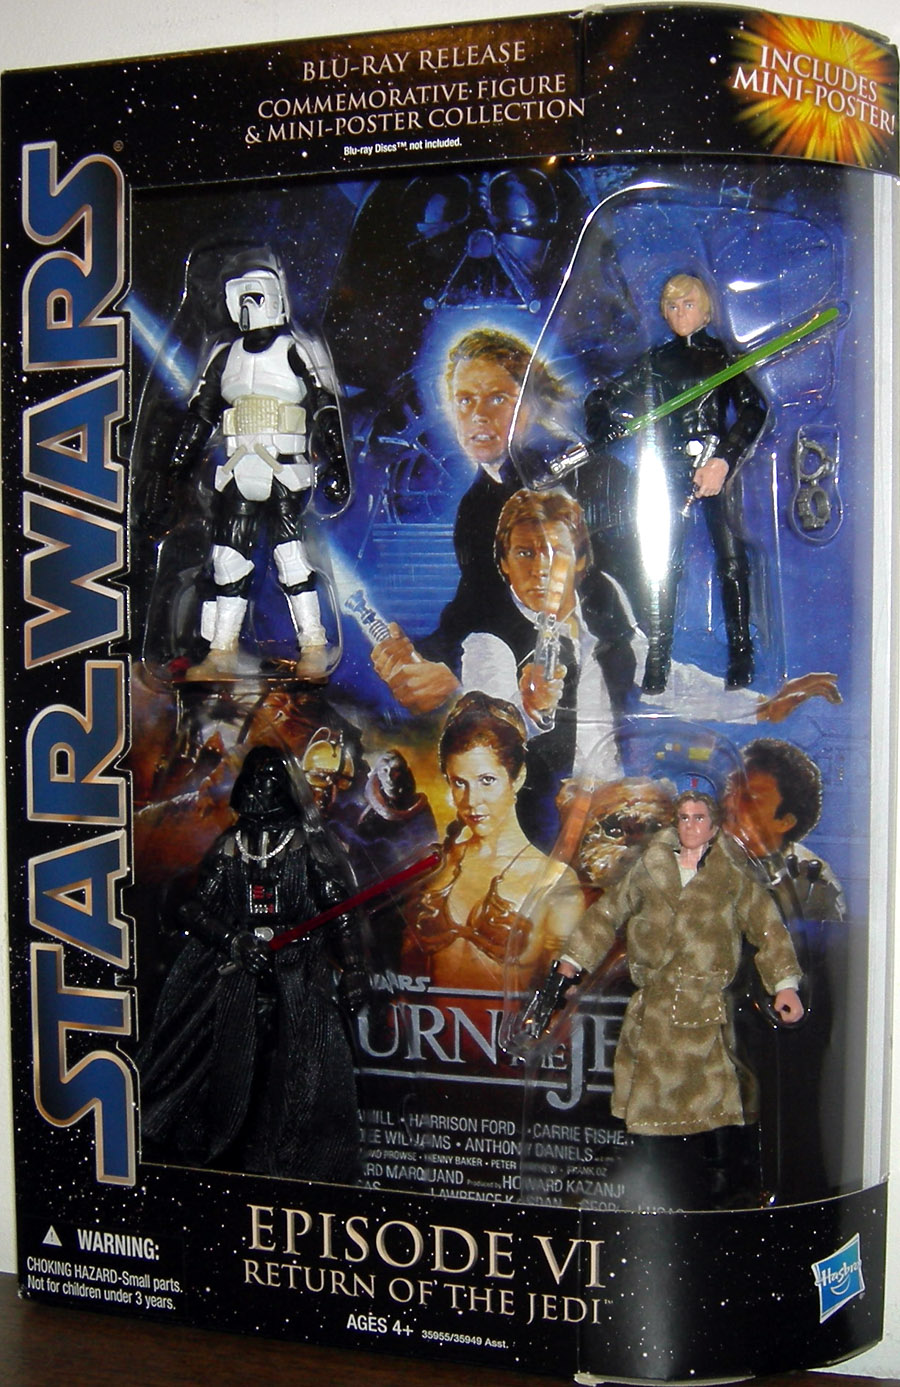 Star Wars Blu-Ray Release Commemorative Action Figures Mini-Poster 